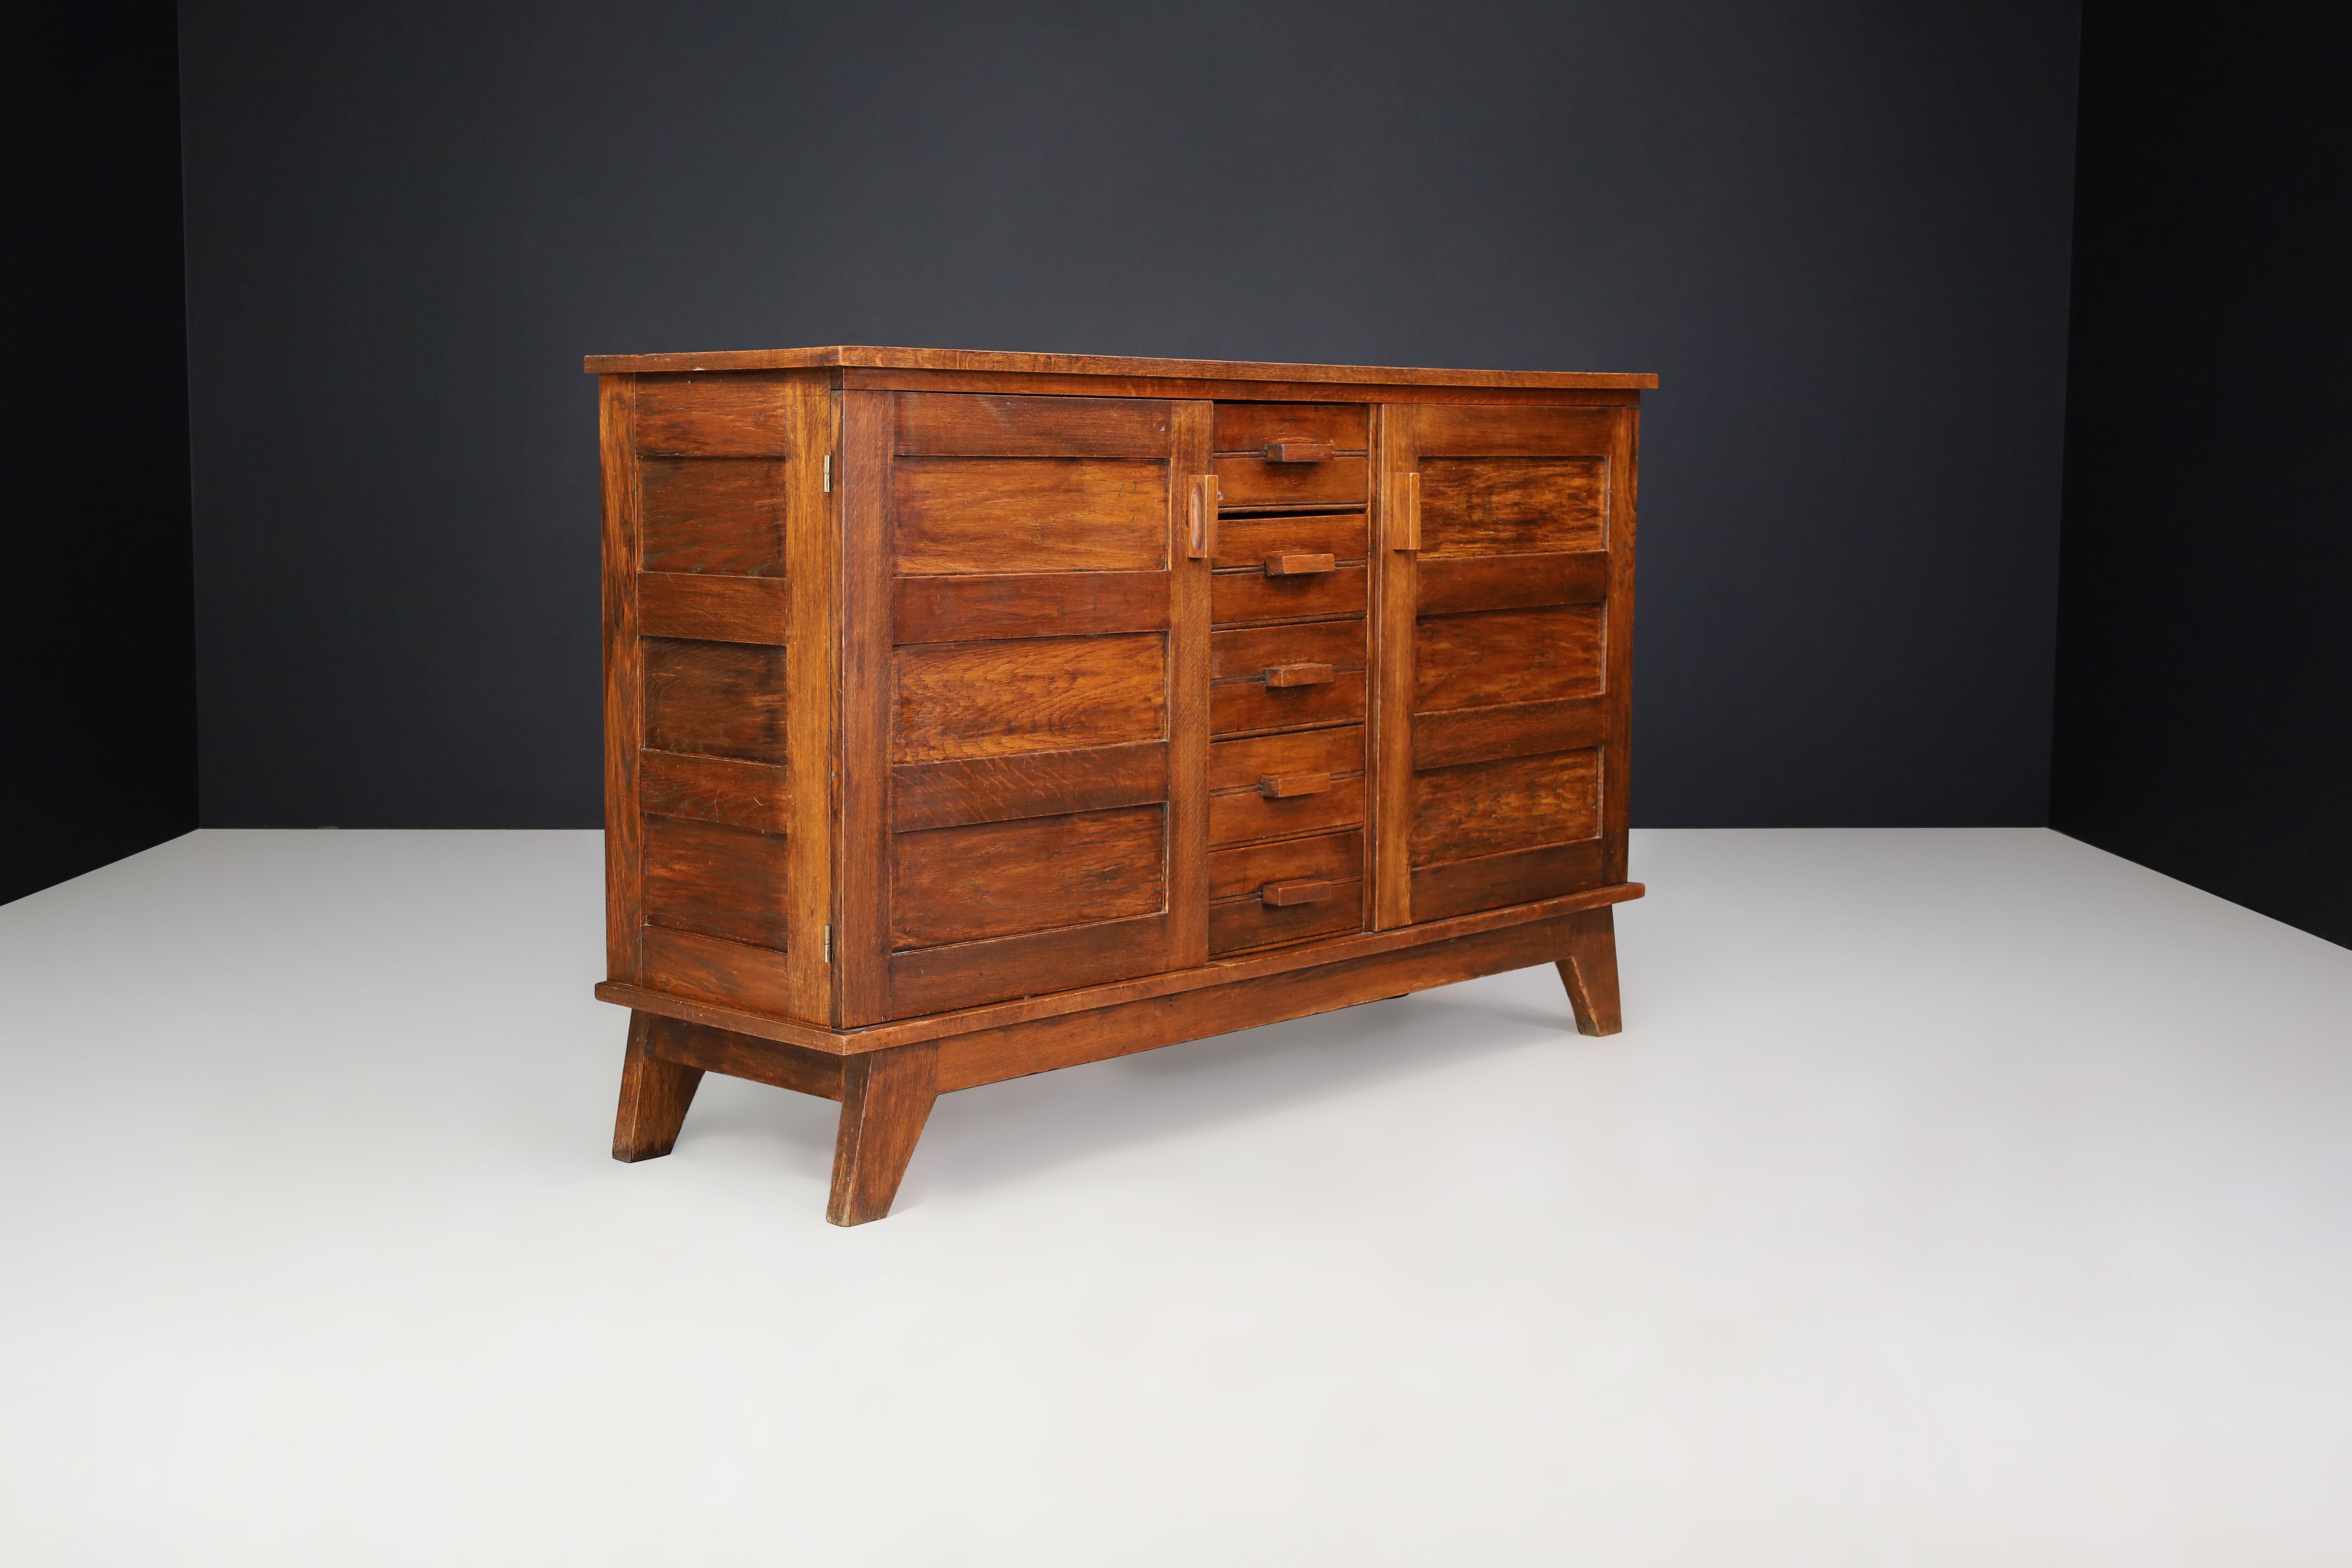 Midcentury sideboard in patinated French oak by René Gabriel, France, 1940s

This mid-century sideboard is made of French oak and was designed by René Gabriel in France during the 1940s. It was created as part of a collection of emergency furniture